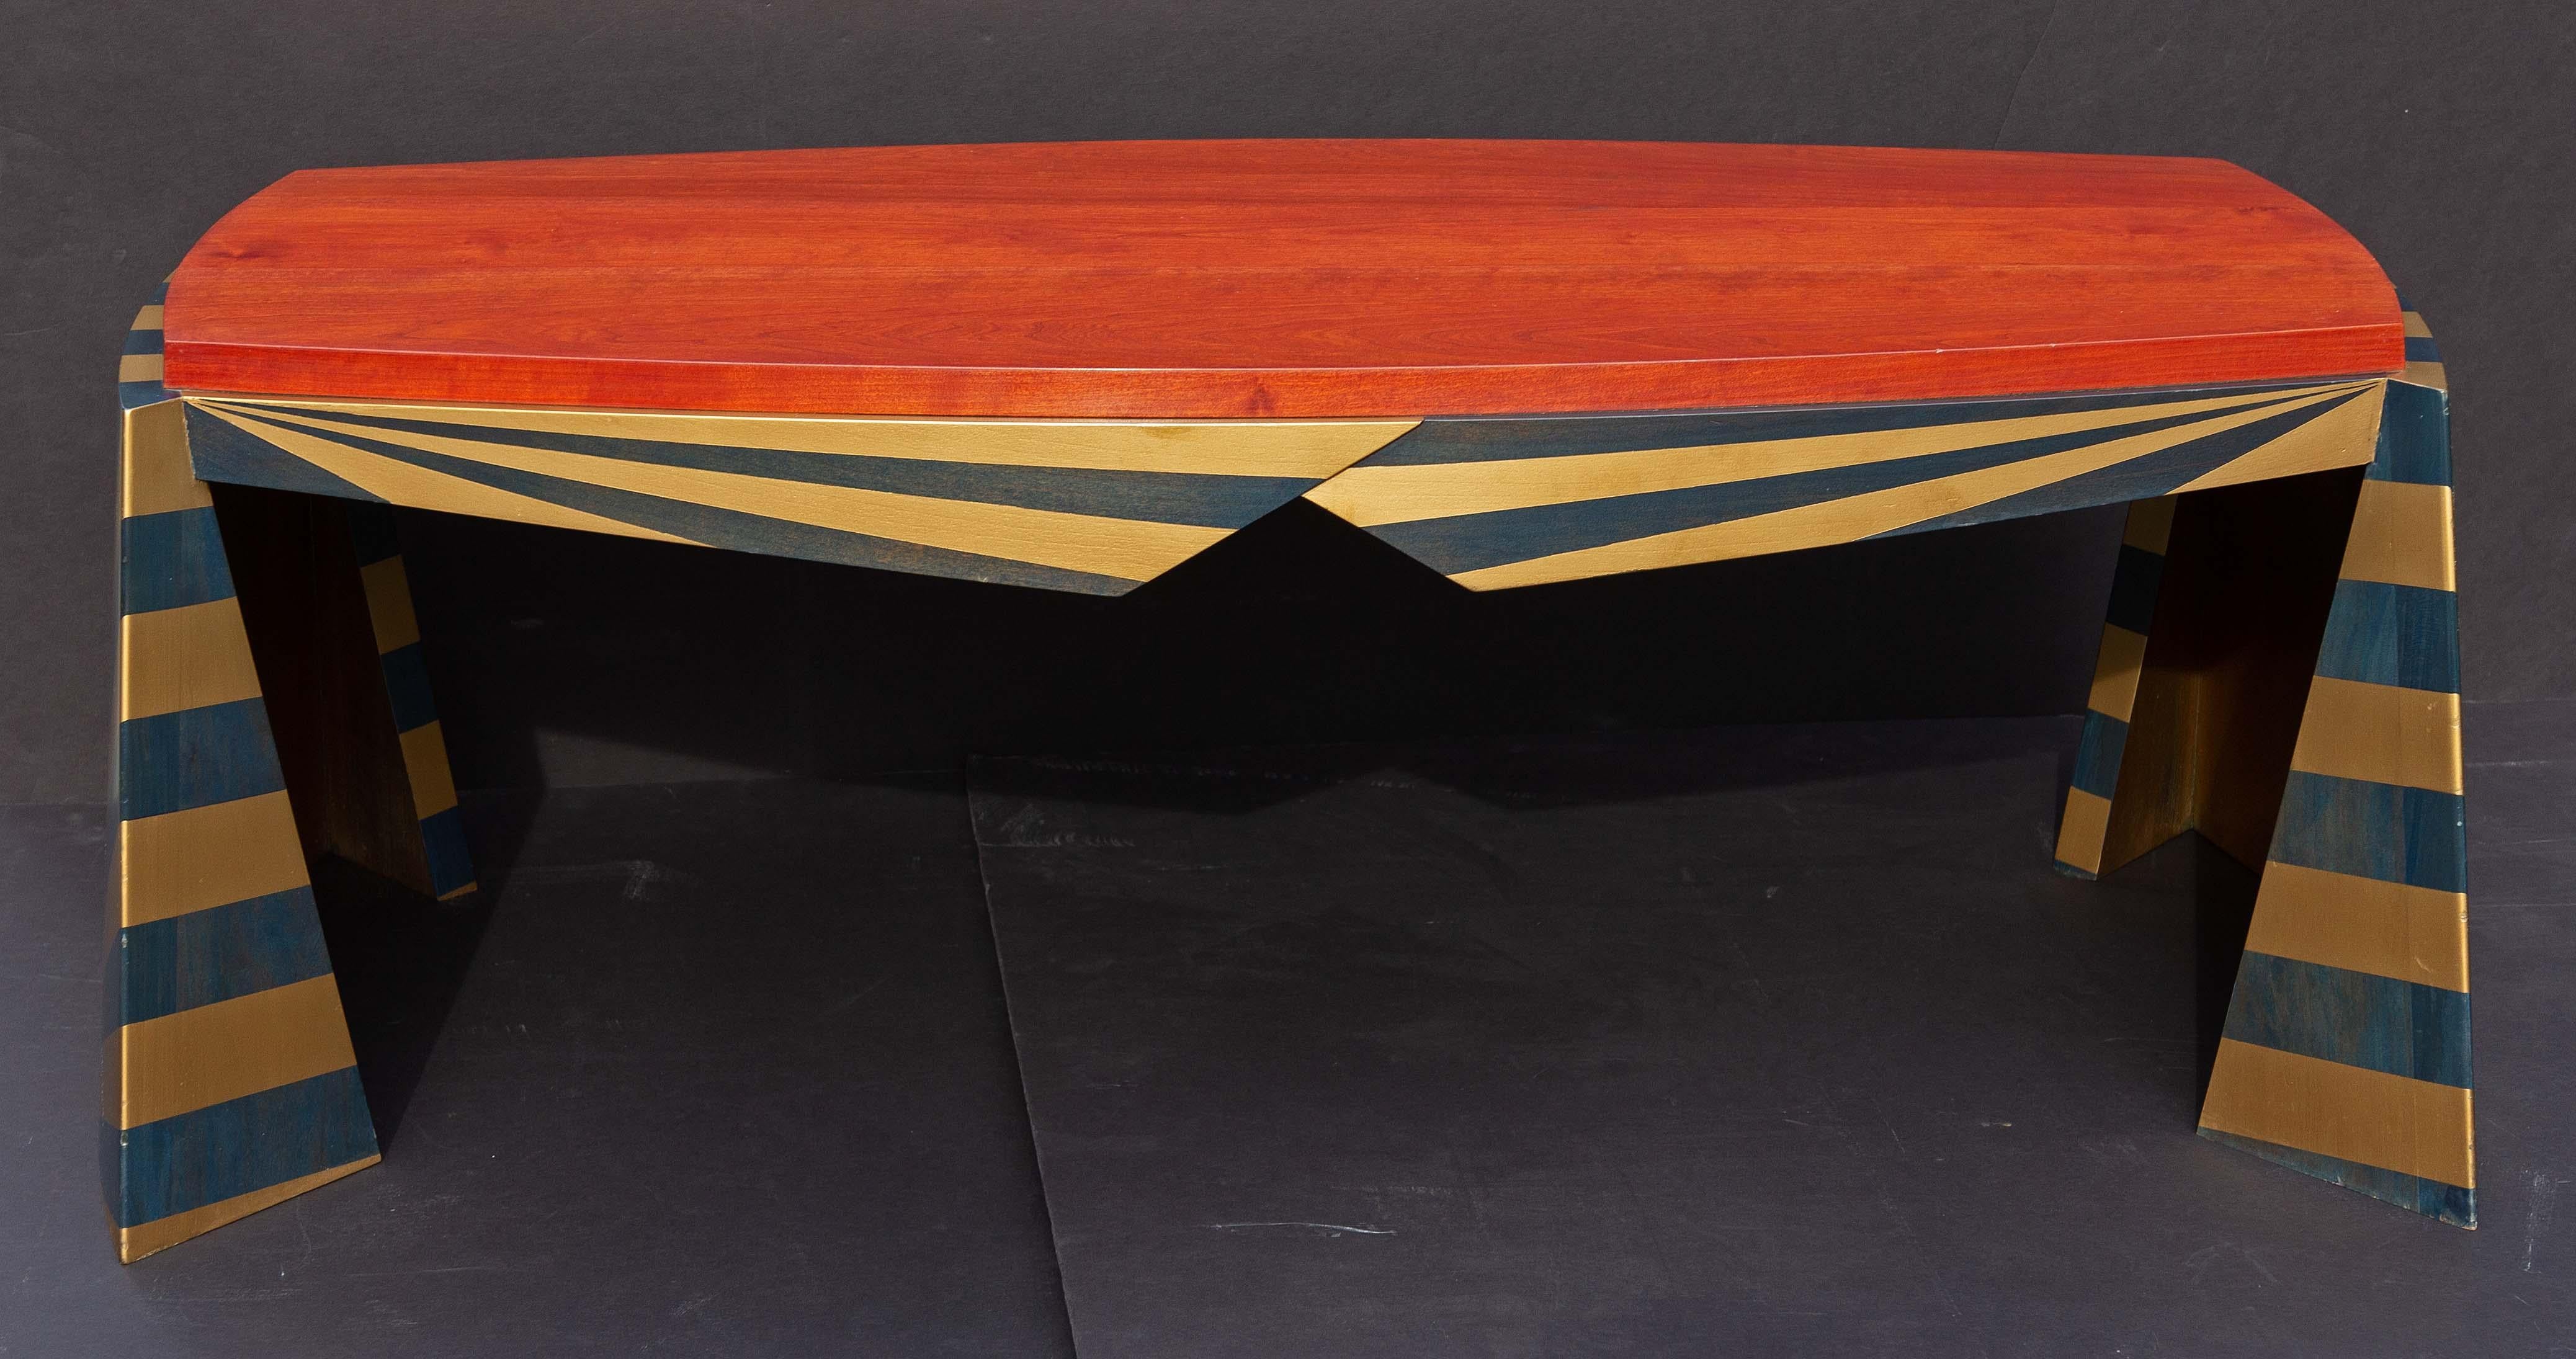 North American Exotic American Studio Craft Sculptural Coffee Table For Sale